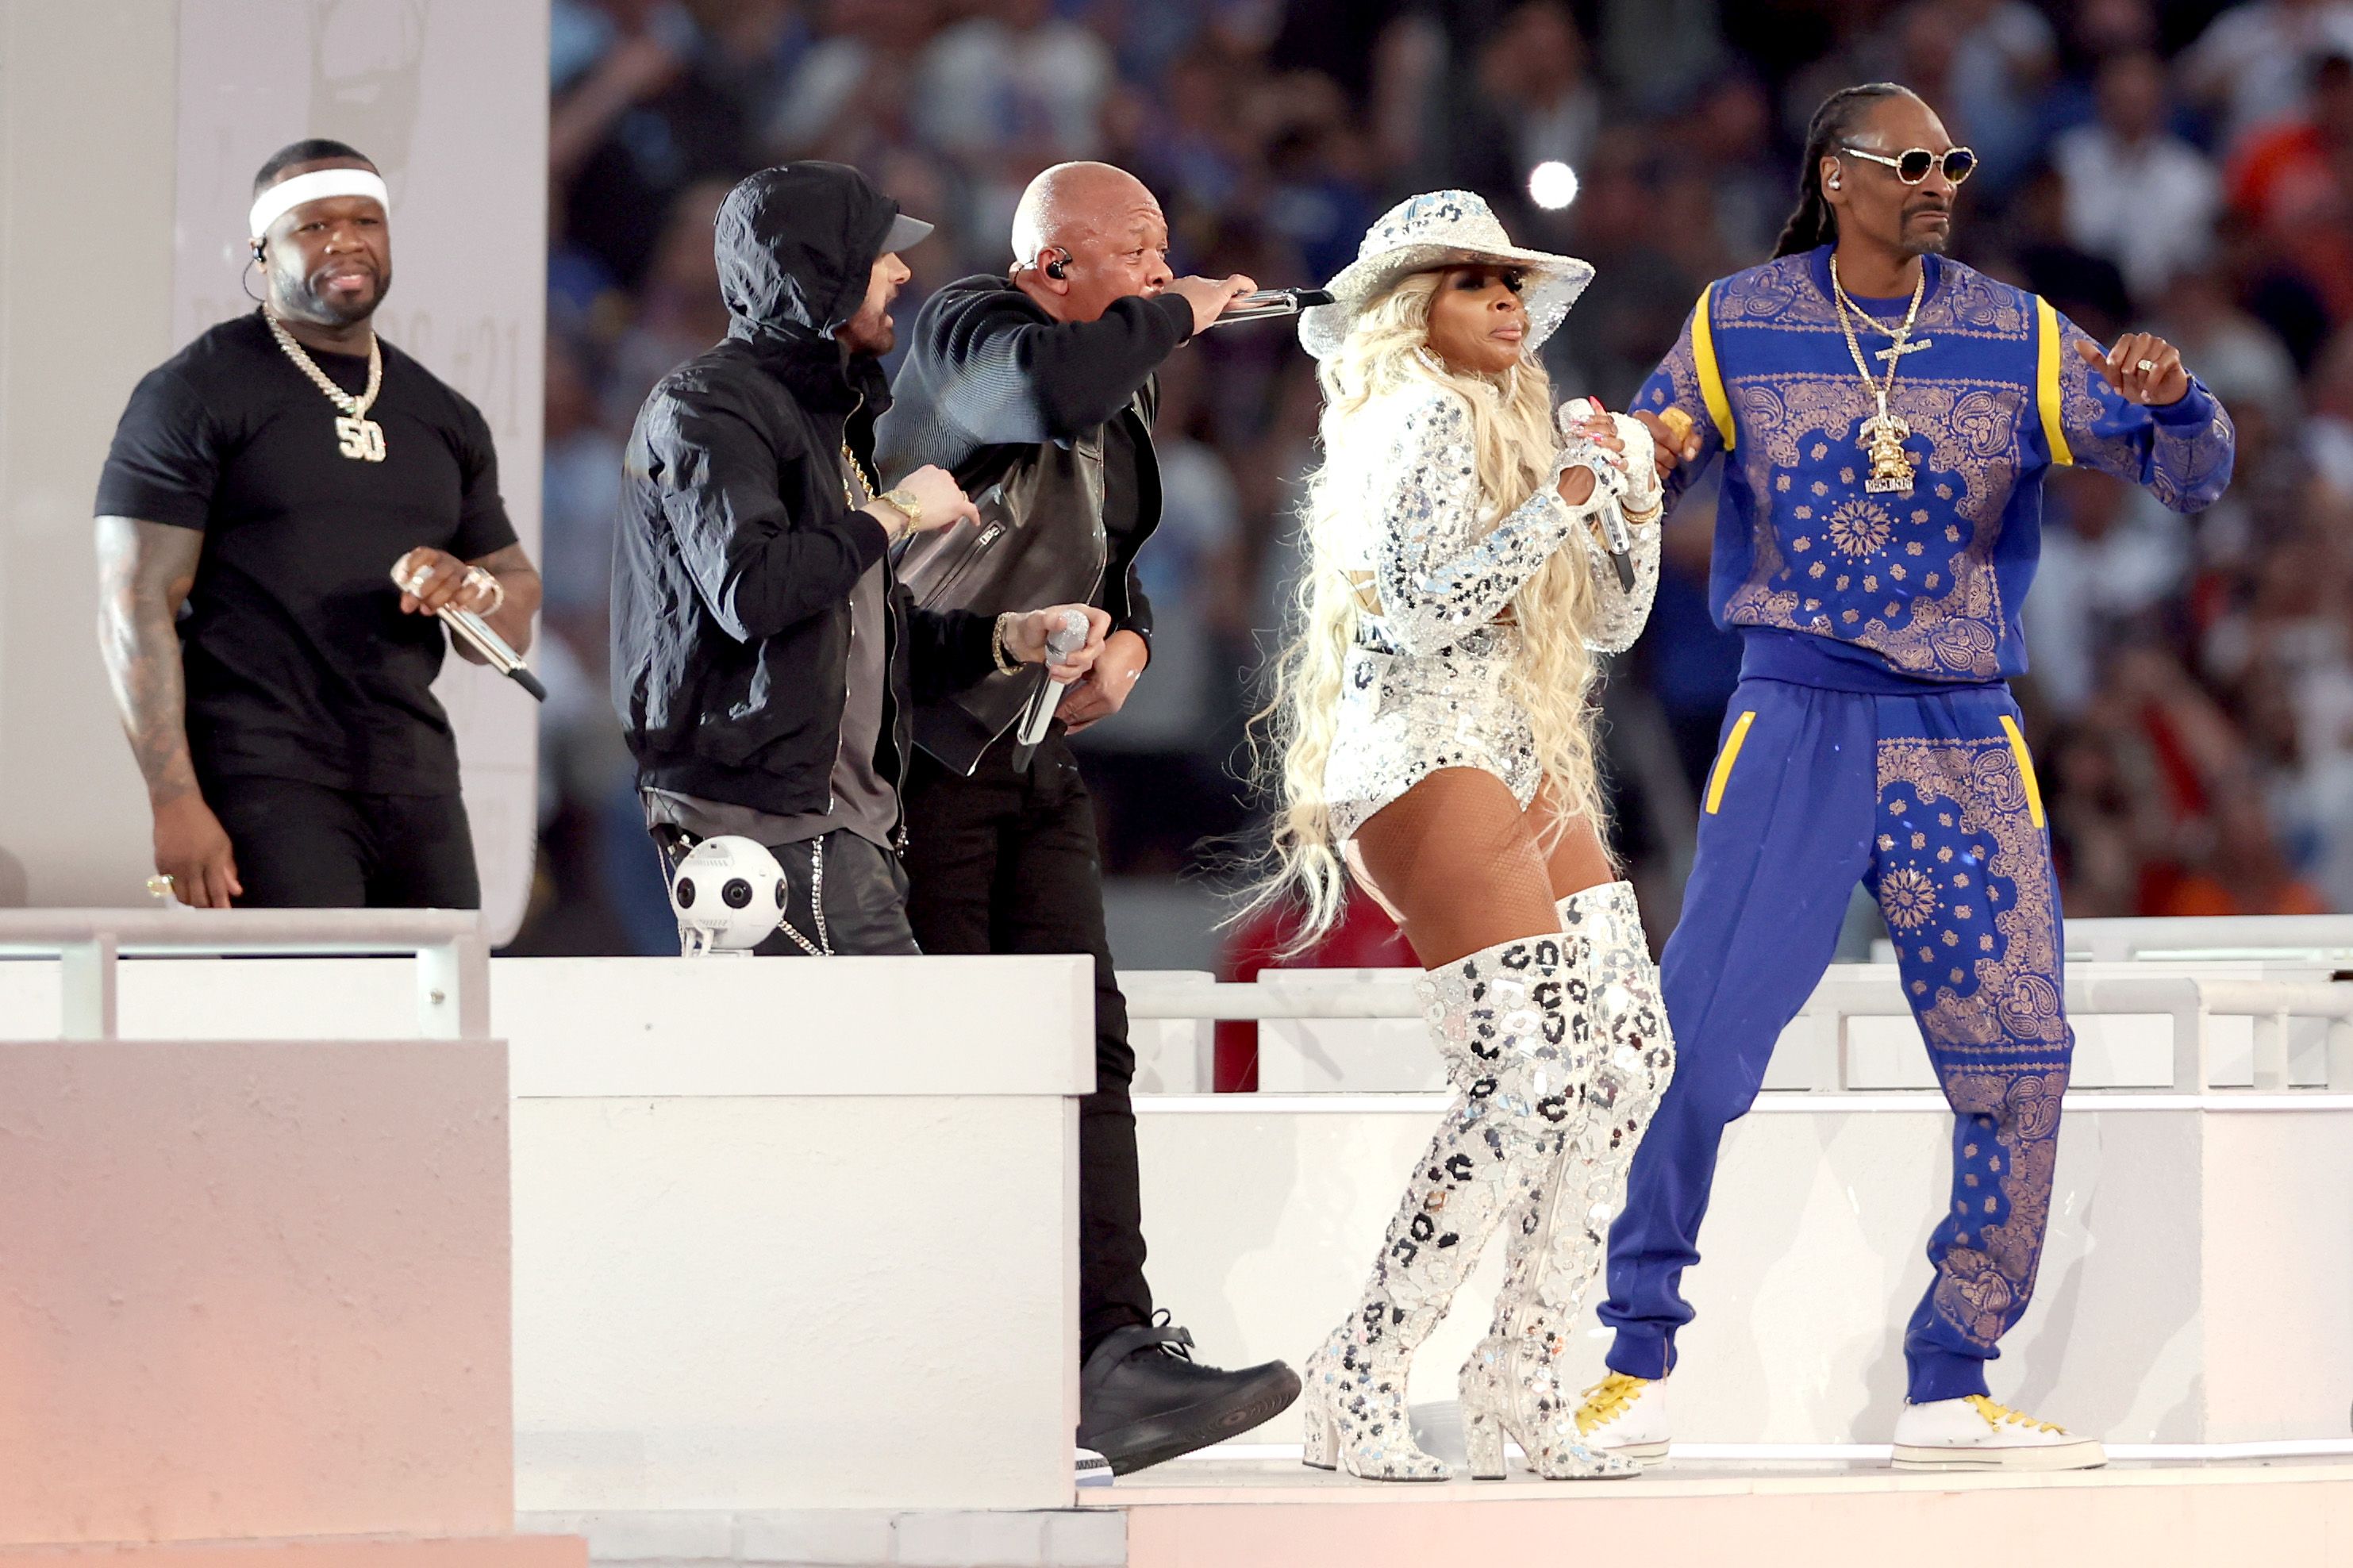 Best Tweets About Super Bowl 2022 Halftime Show Featuring Mary J